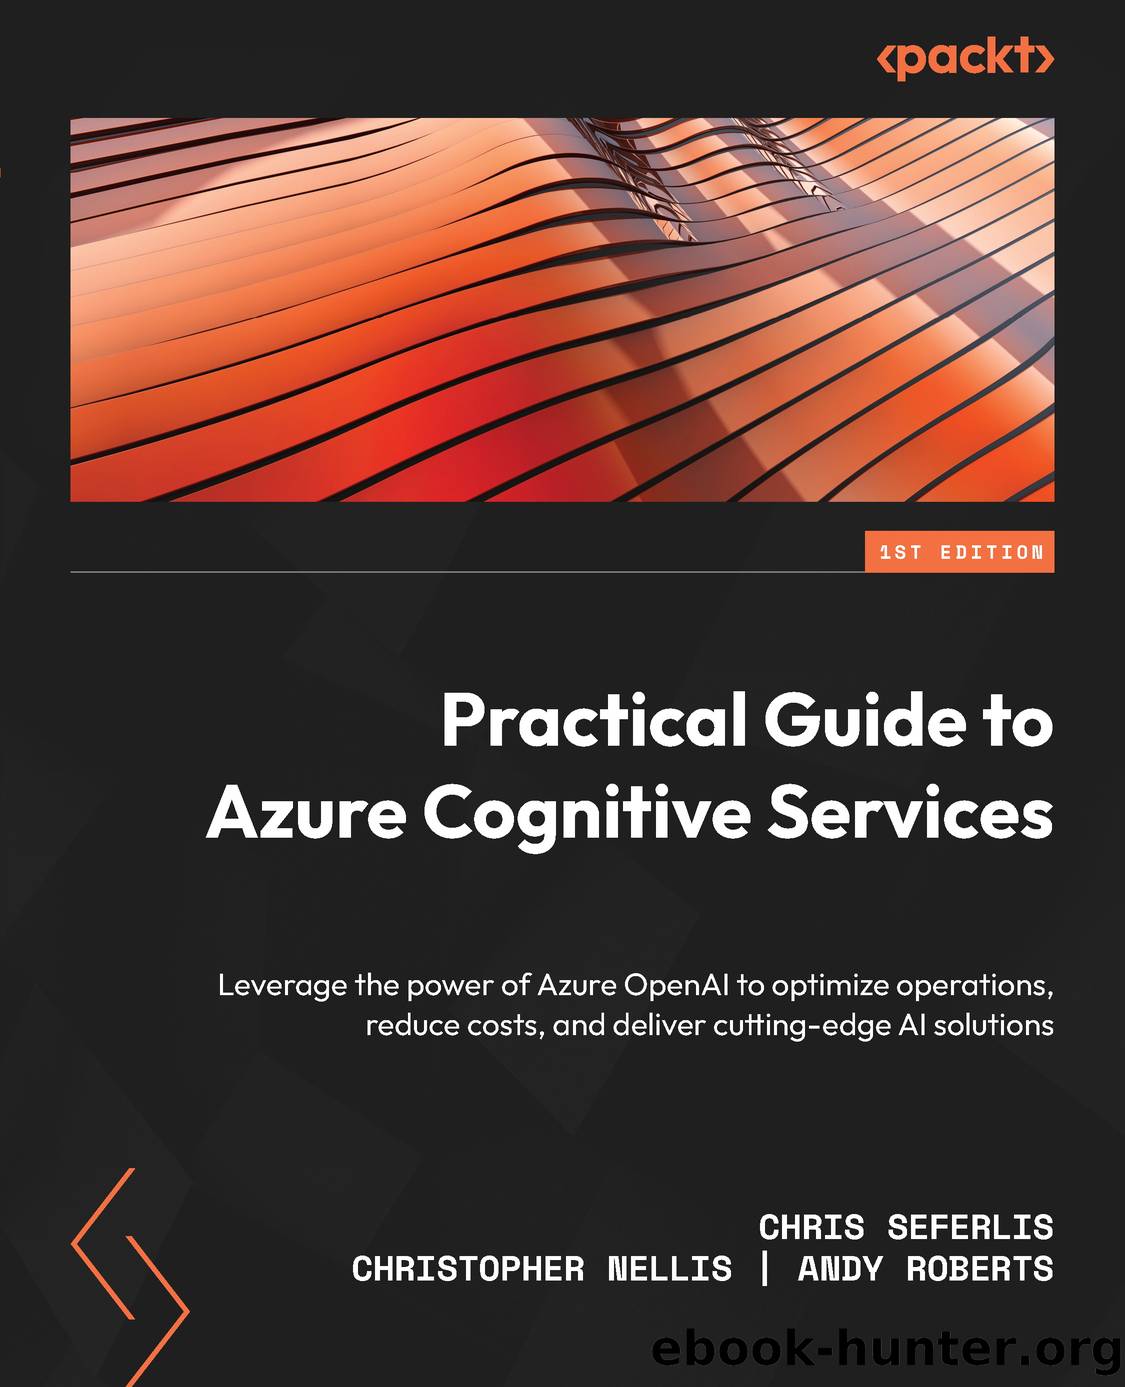 Practical Guide to Azure Cognitive Services by Chris Seferlis & Christopher Nellis & Andy Roberts